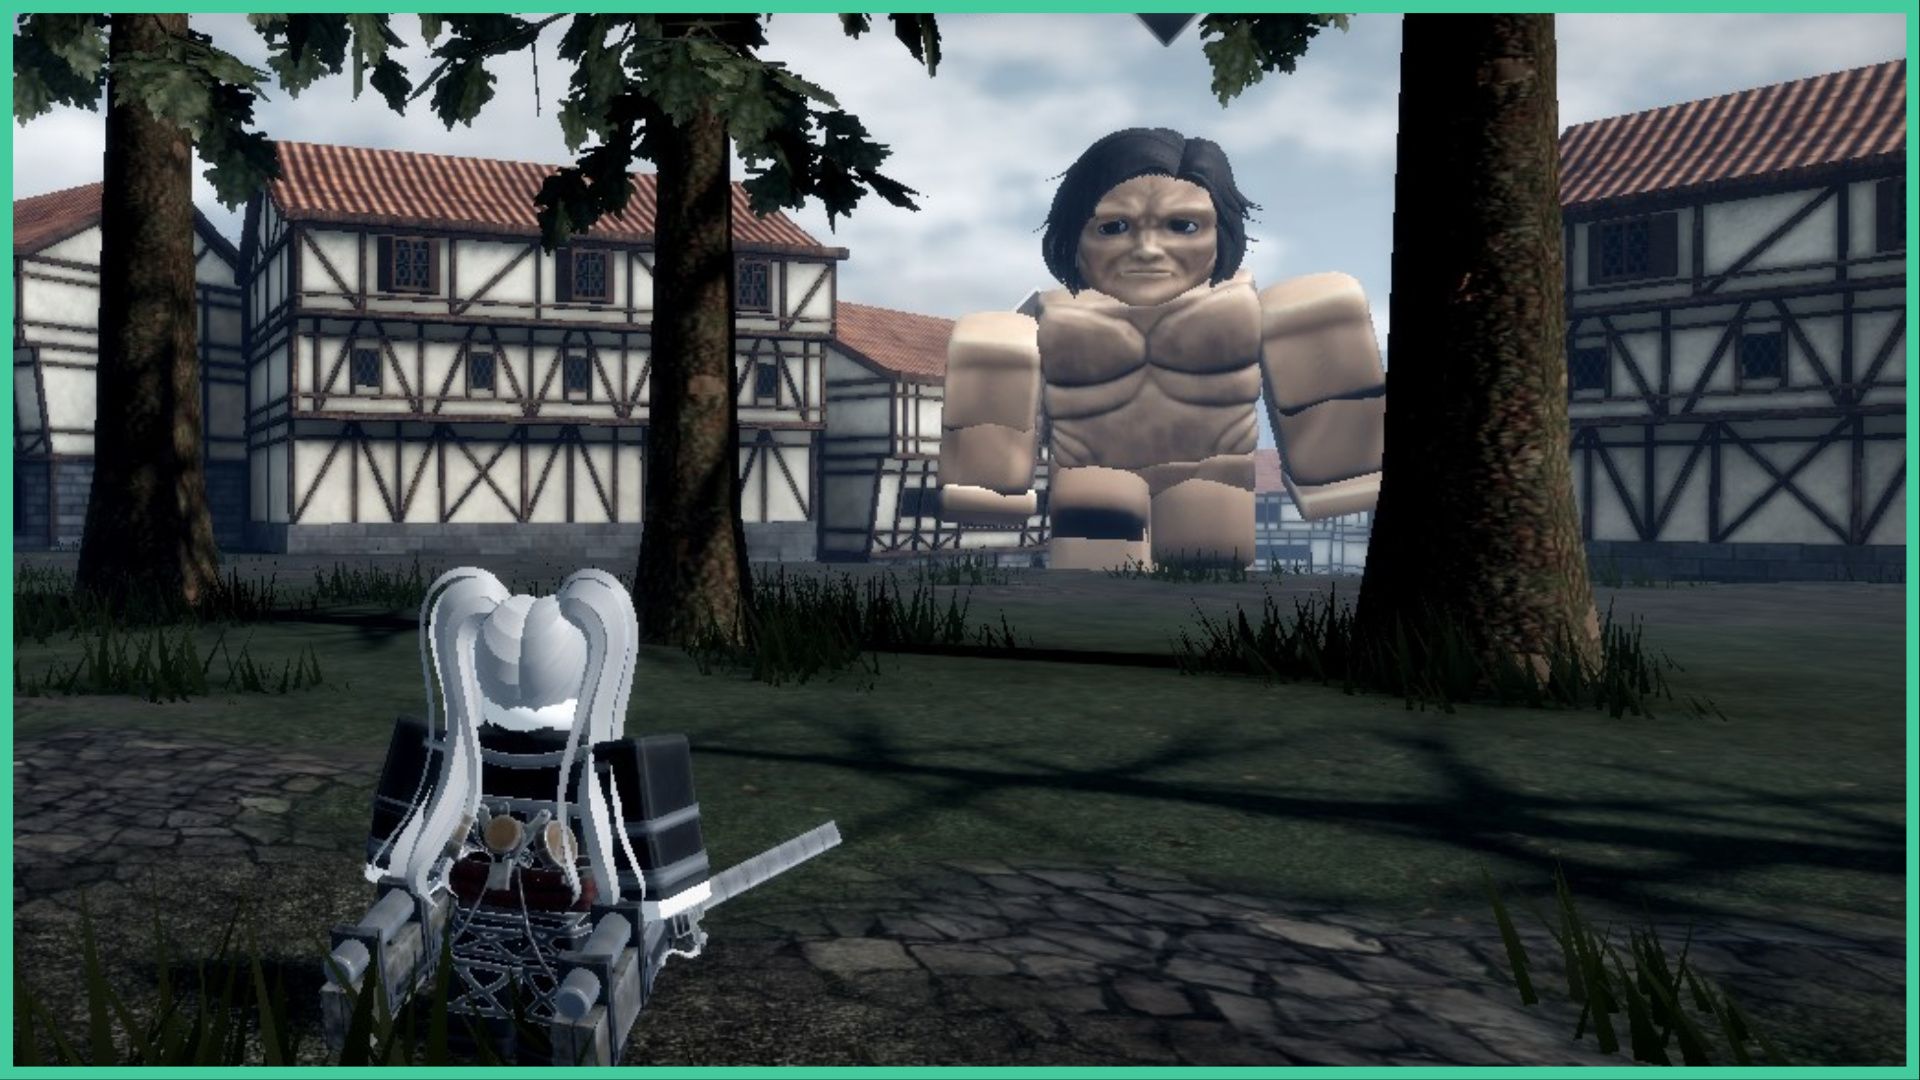 feature image for our attack on titan revolution family tier list, the image features a screenshot of a player holding blades as they watch a large titan walk towards them amongst the trees and traditional style buildings